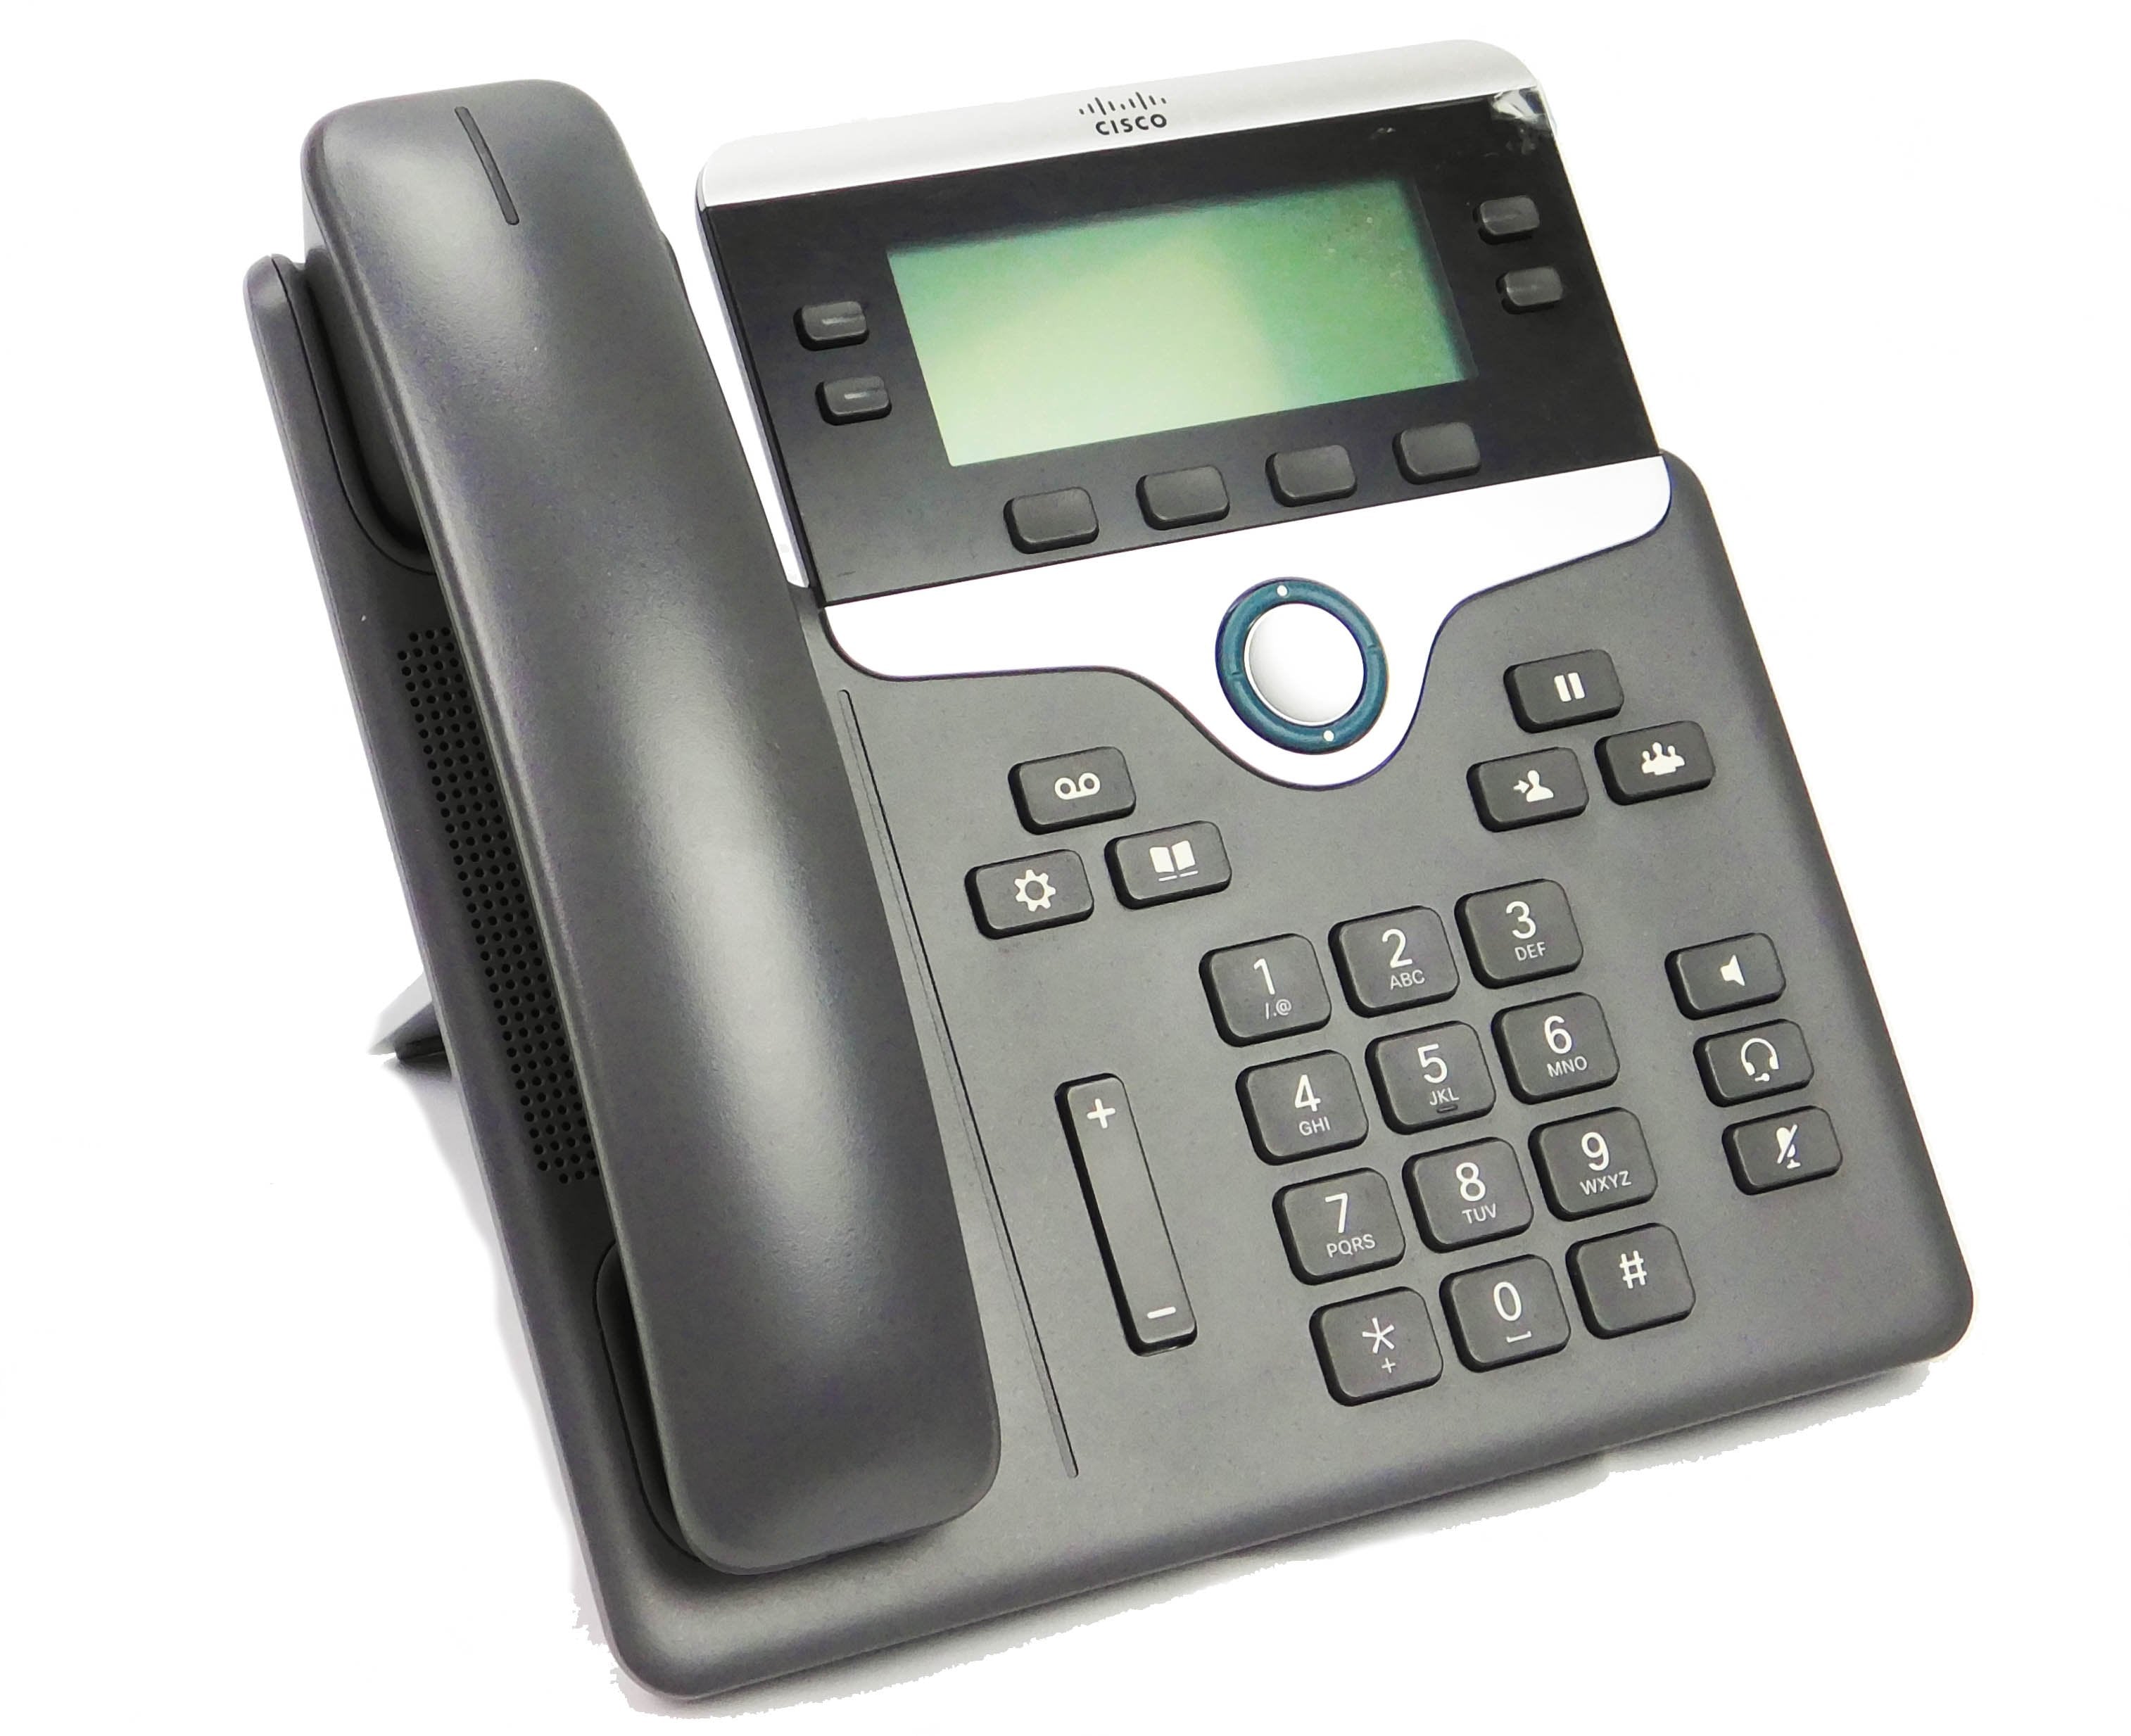 Cisco 7800 Series Voip Phone (Power Supply Not Included) - CP-7841